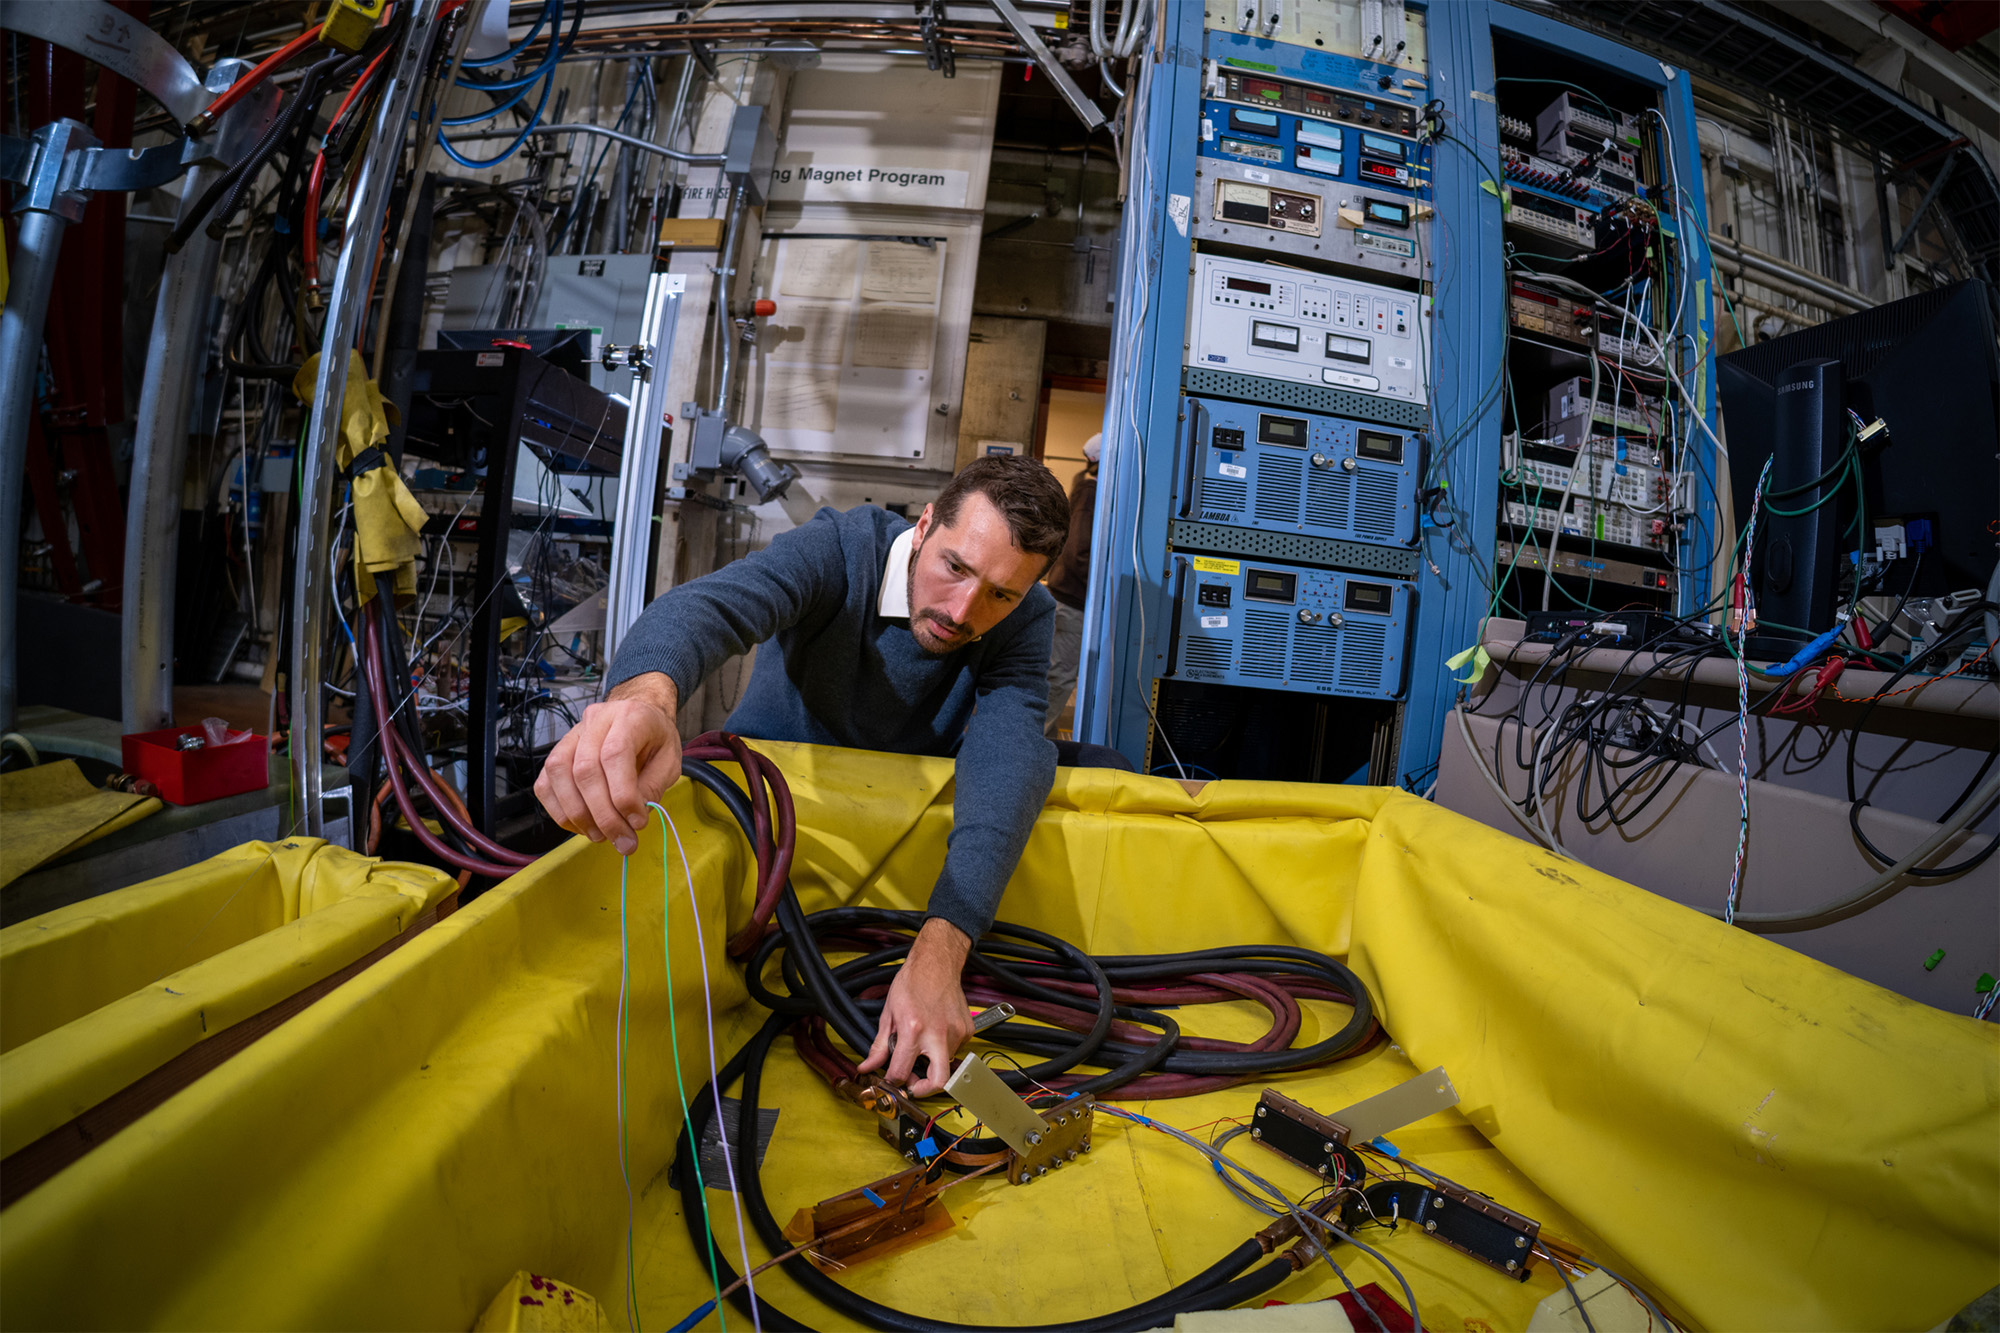 Research scientist Reed Teyber works on a device he developed for measuring high-temperature superconducting magnets.